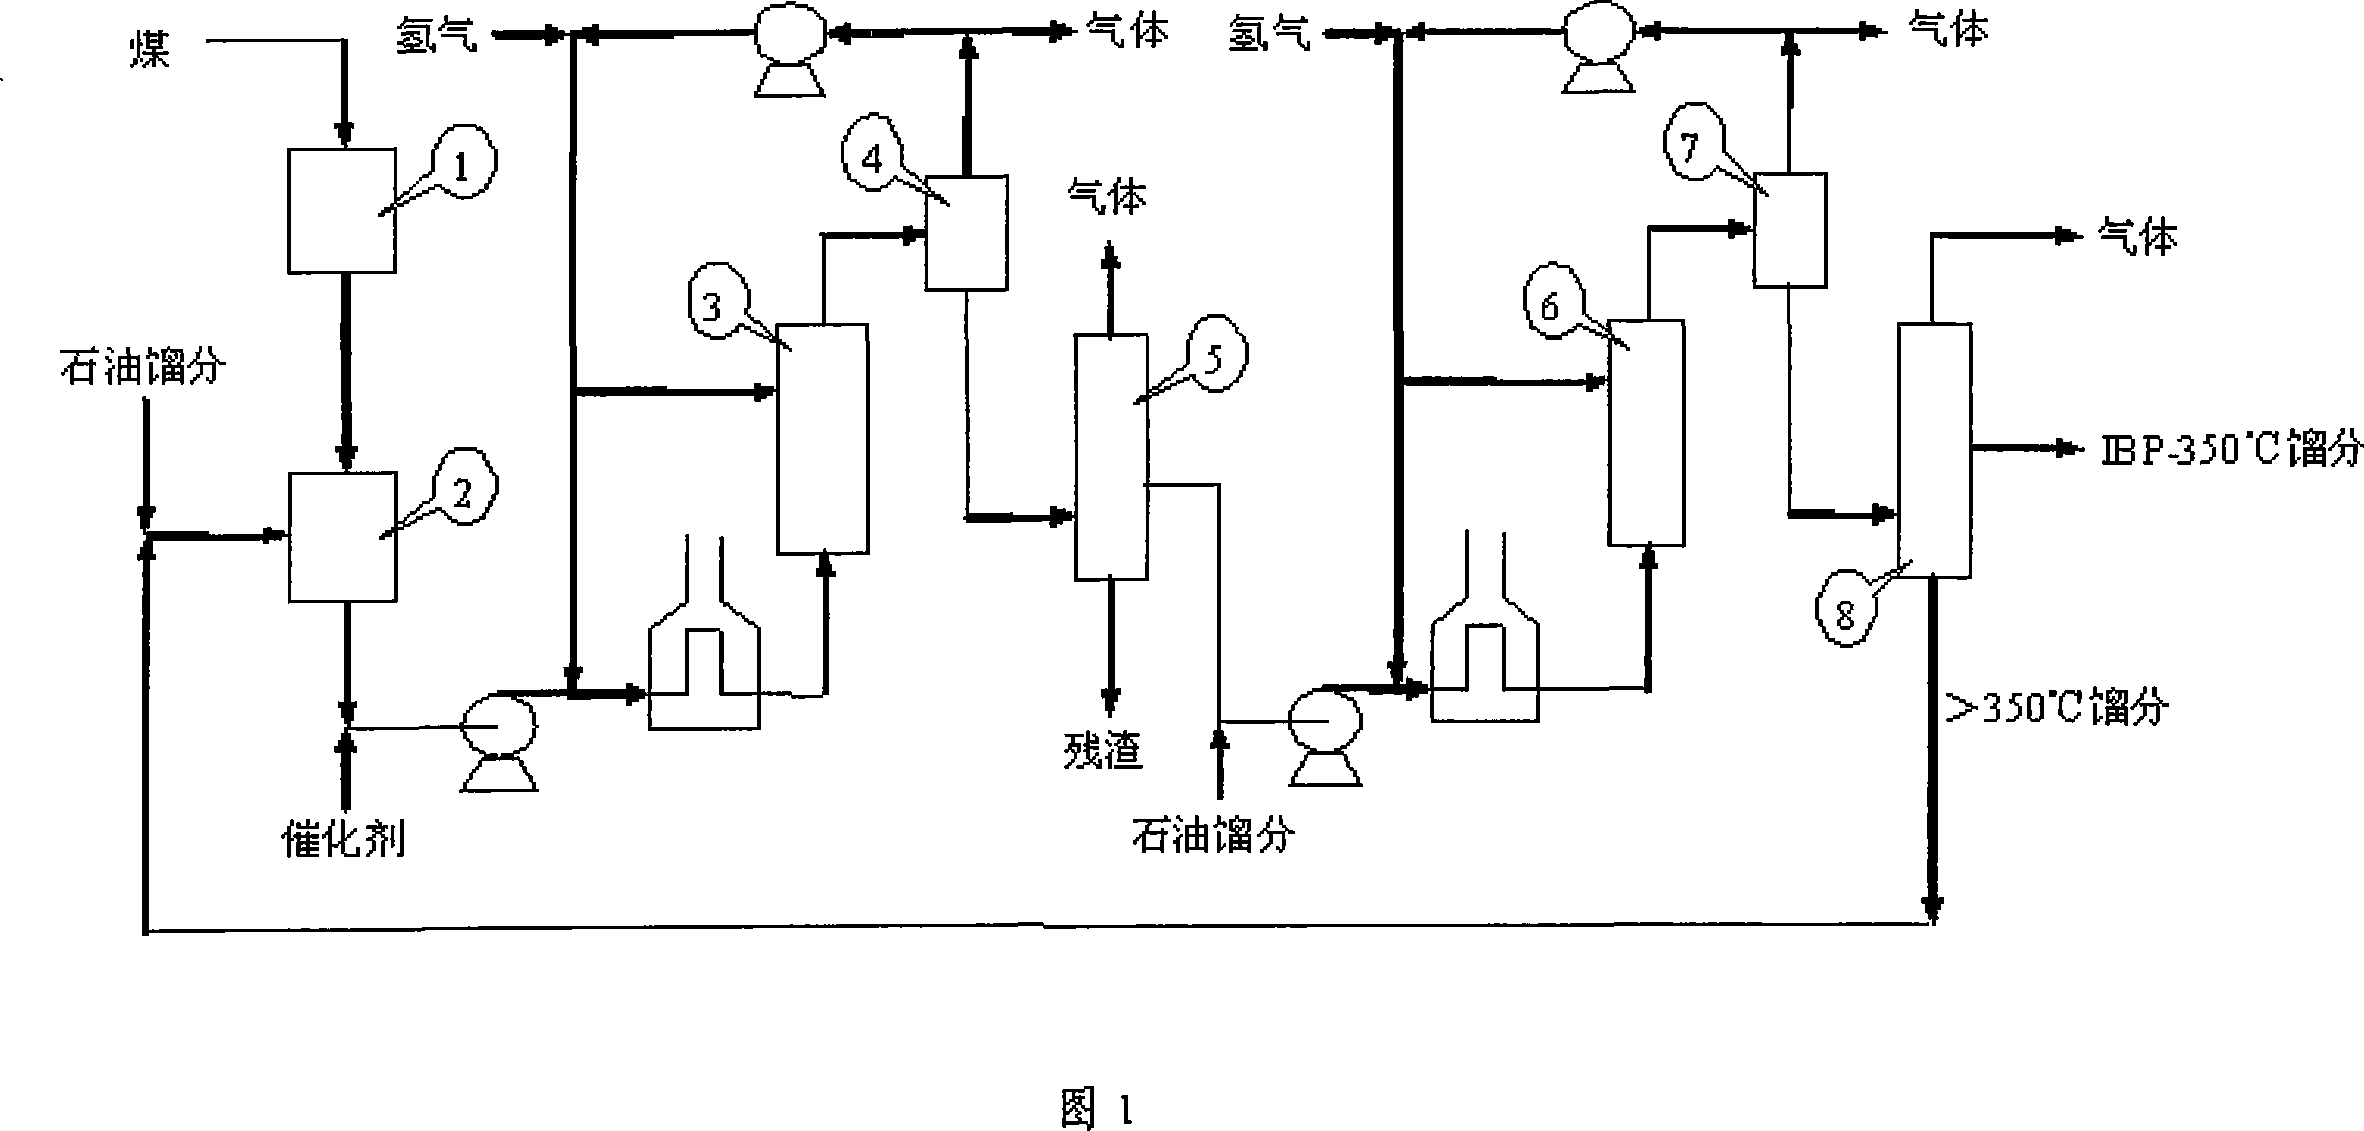 Coal and stone oil joint processing method for producing high quality engine fuel